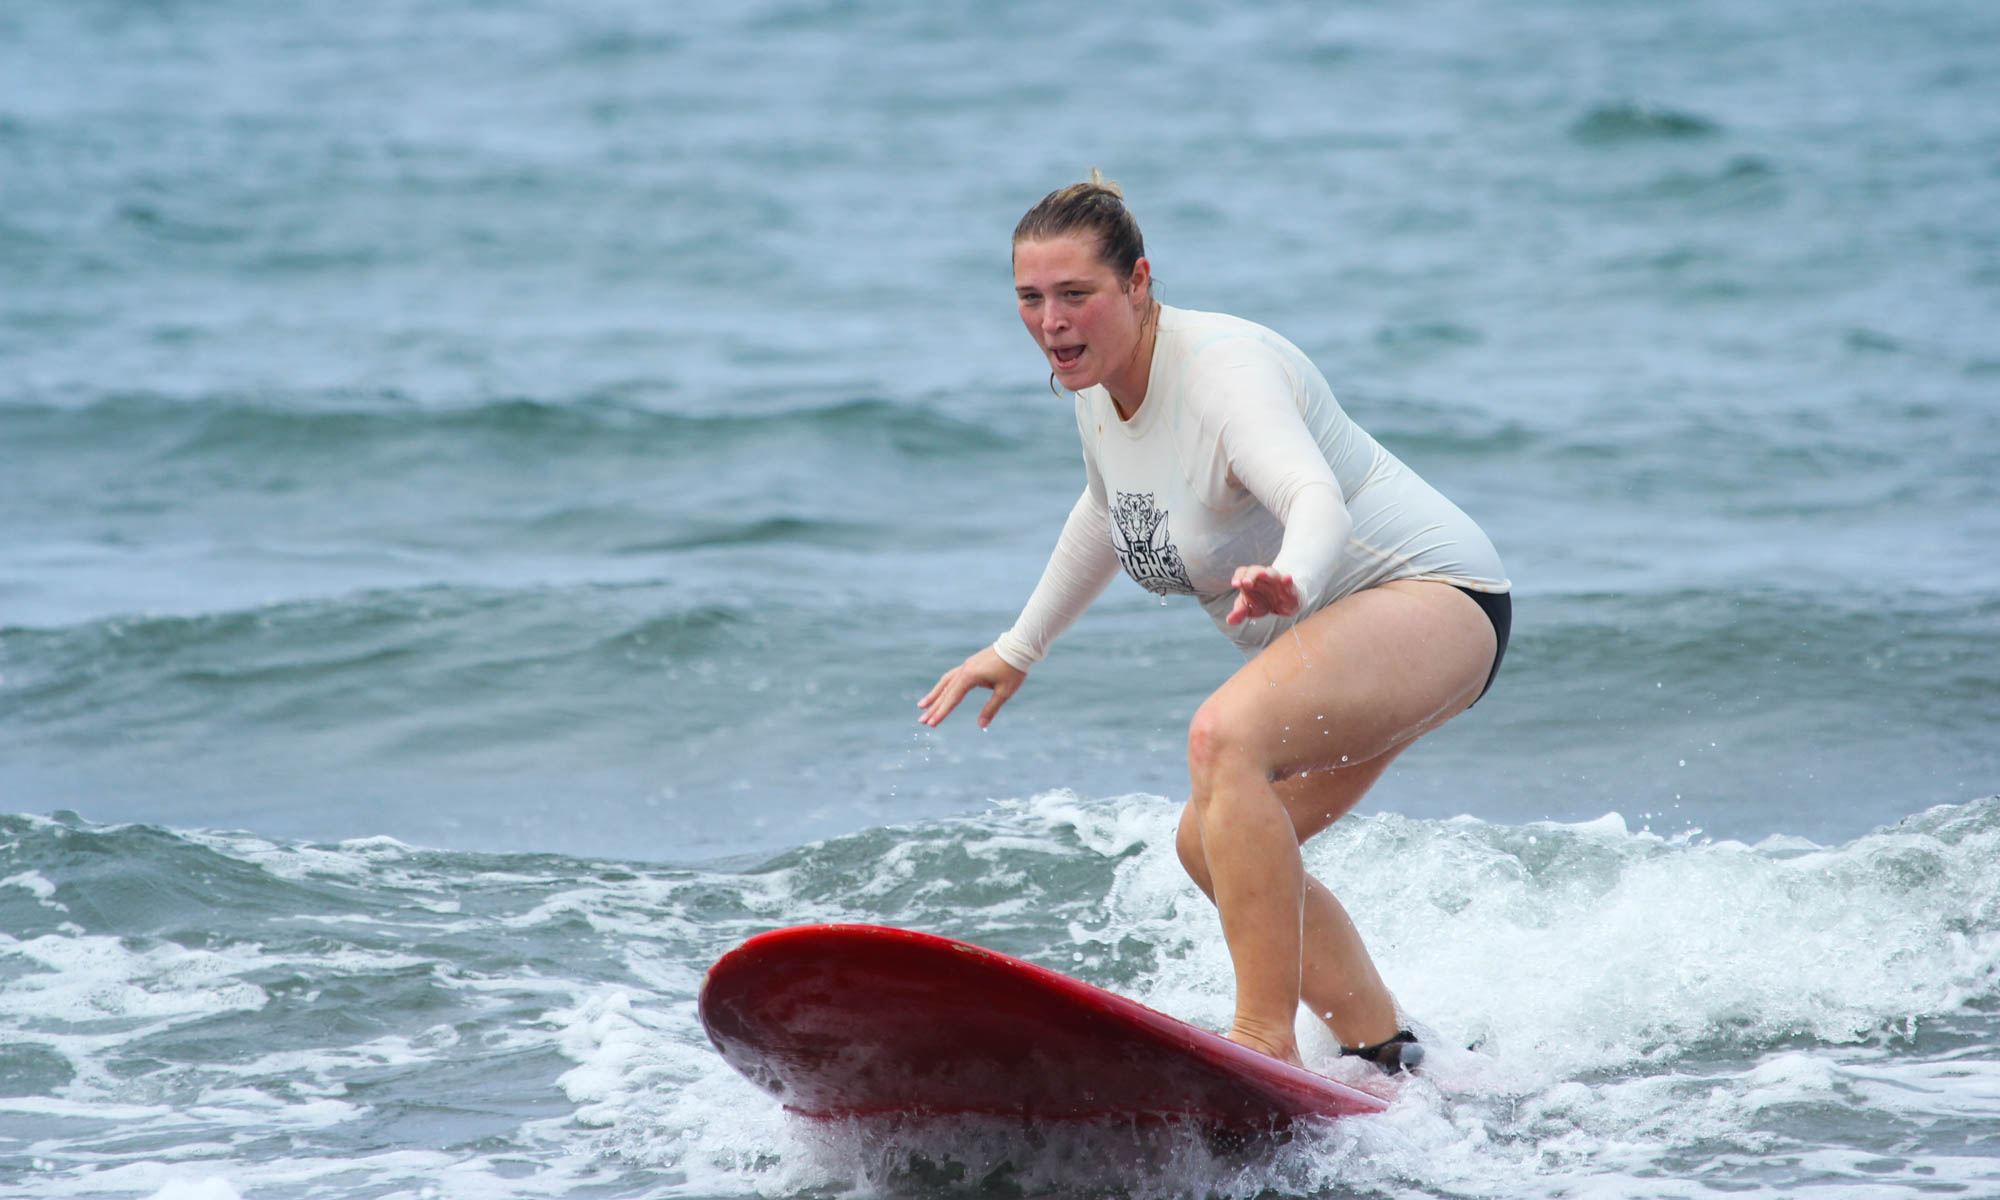 Woman in white shirt learning to surf on red surfboard